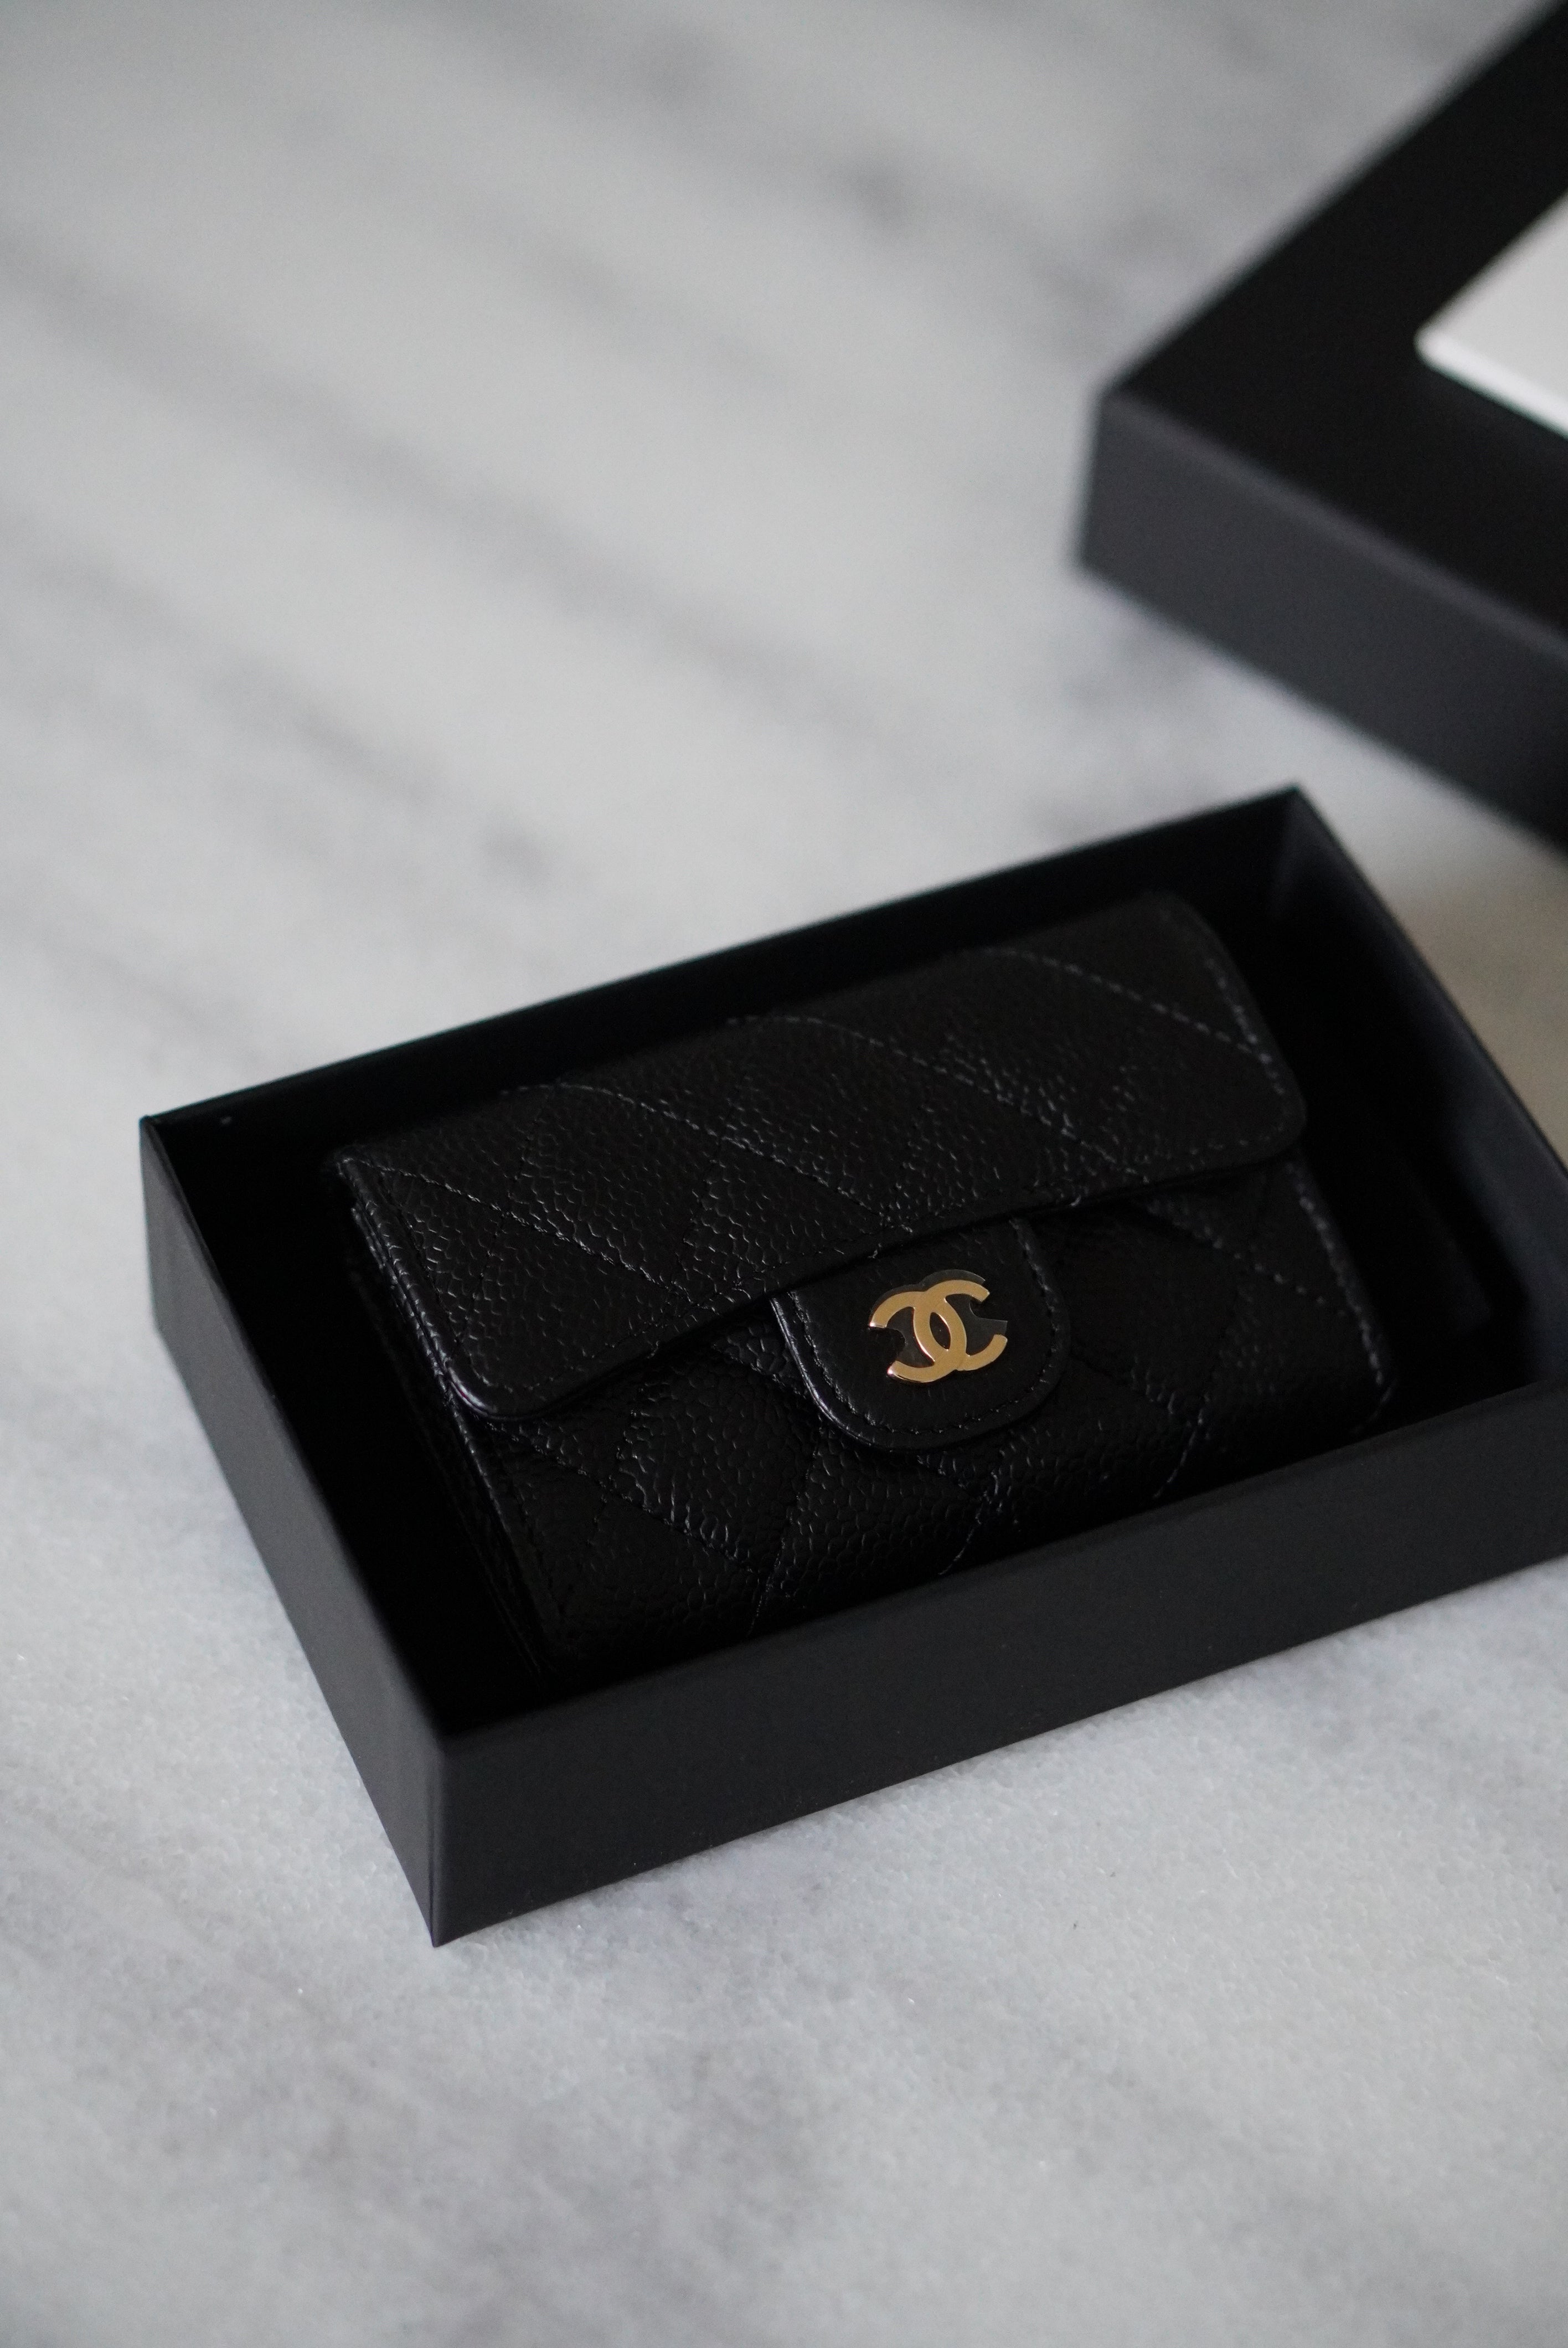 CHANEL Lambskin Quilted Flap Card Holder Black | FASHIONPHILE